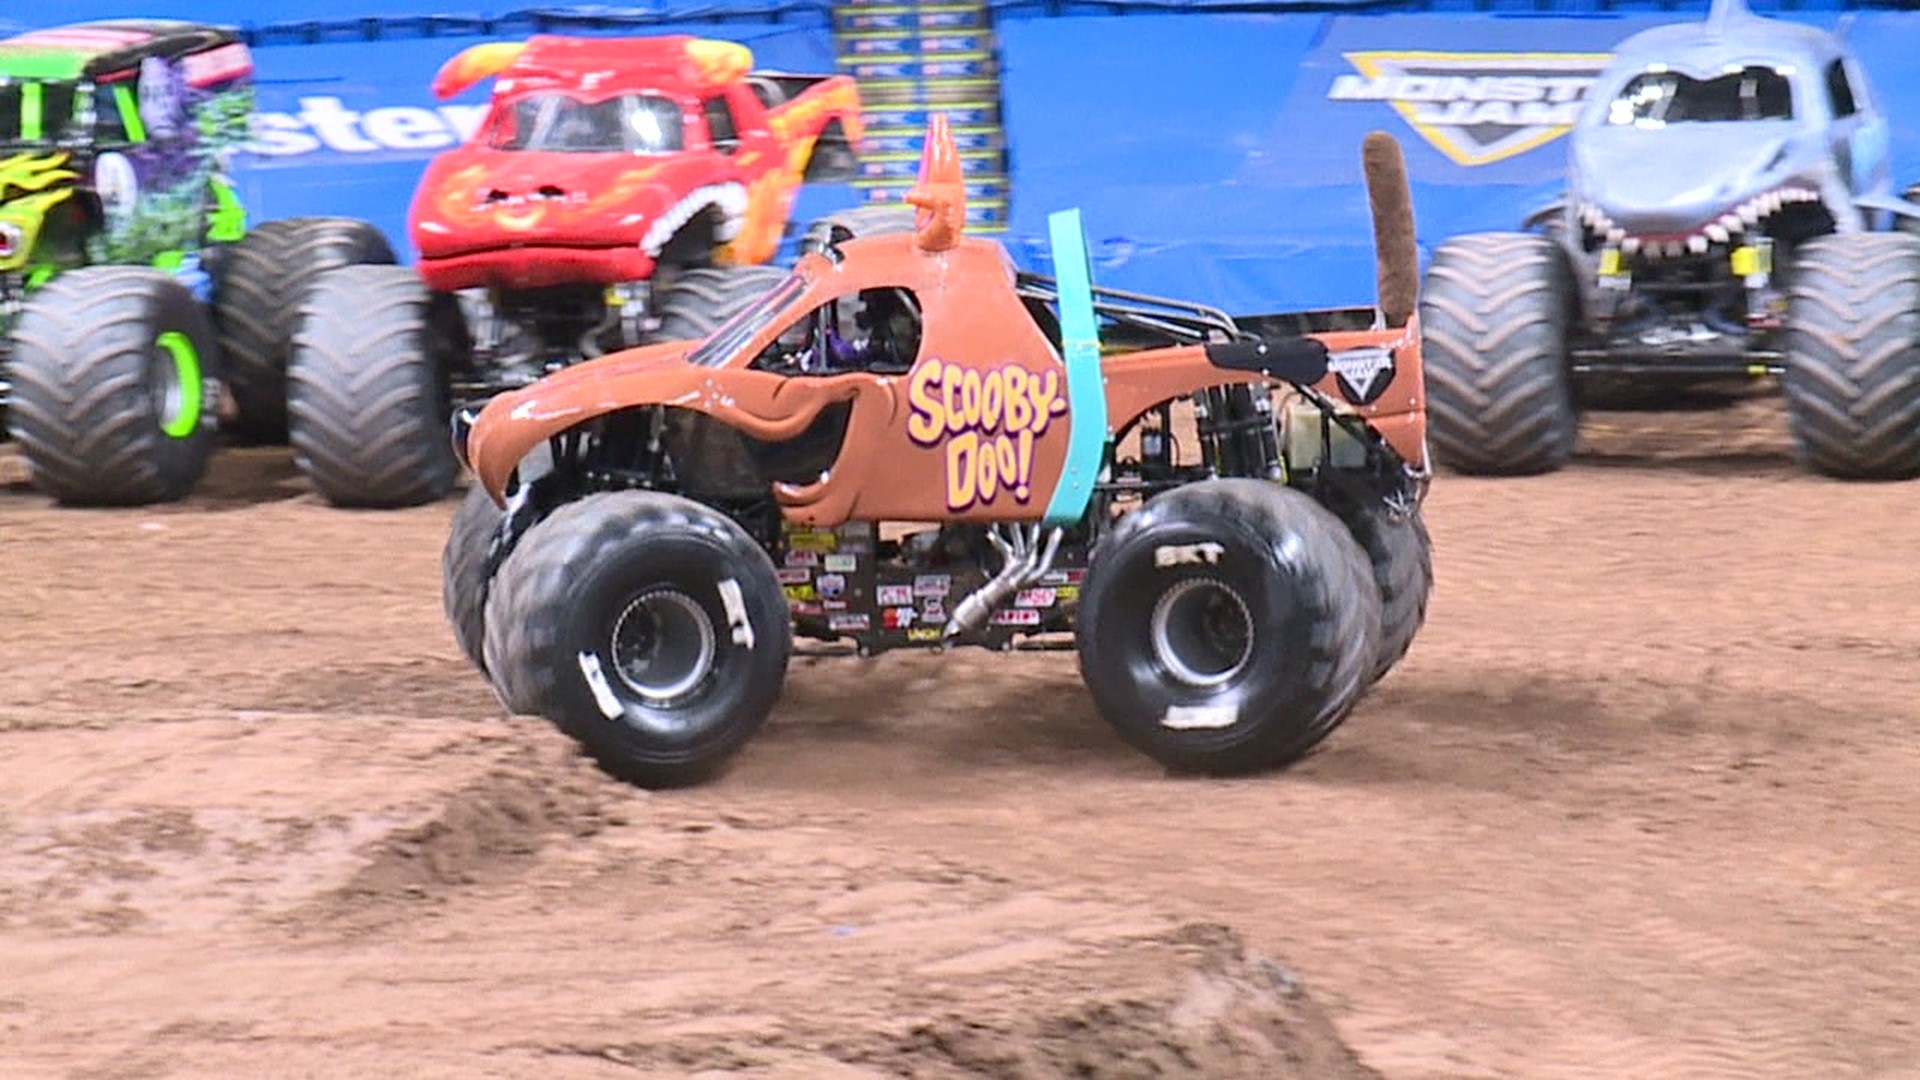 If you're into revving engines and big trucks, we have the event for you. Newswatch 16's Emily Kress shows us what fans can expect this weekend at Mohegan Sun Arena.